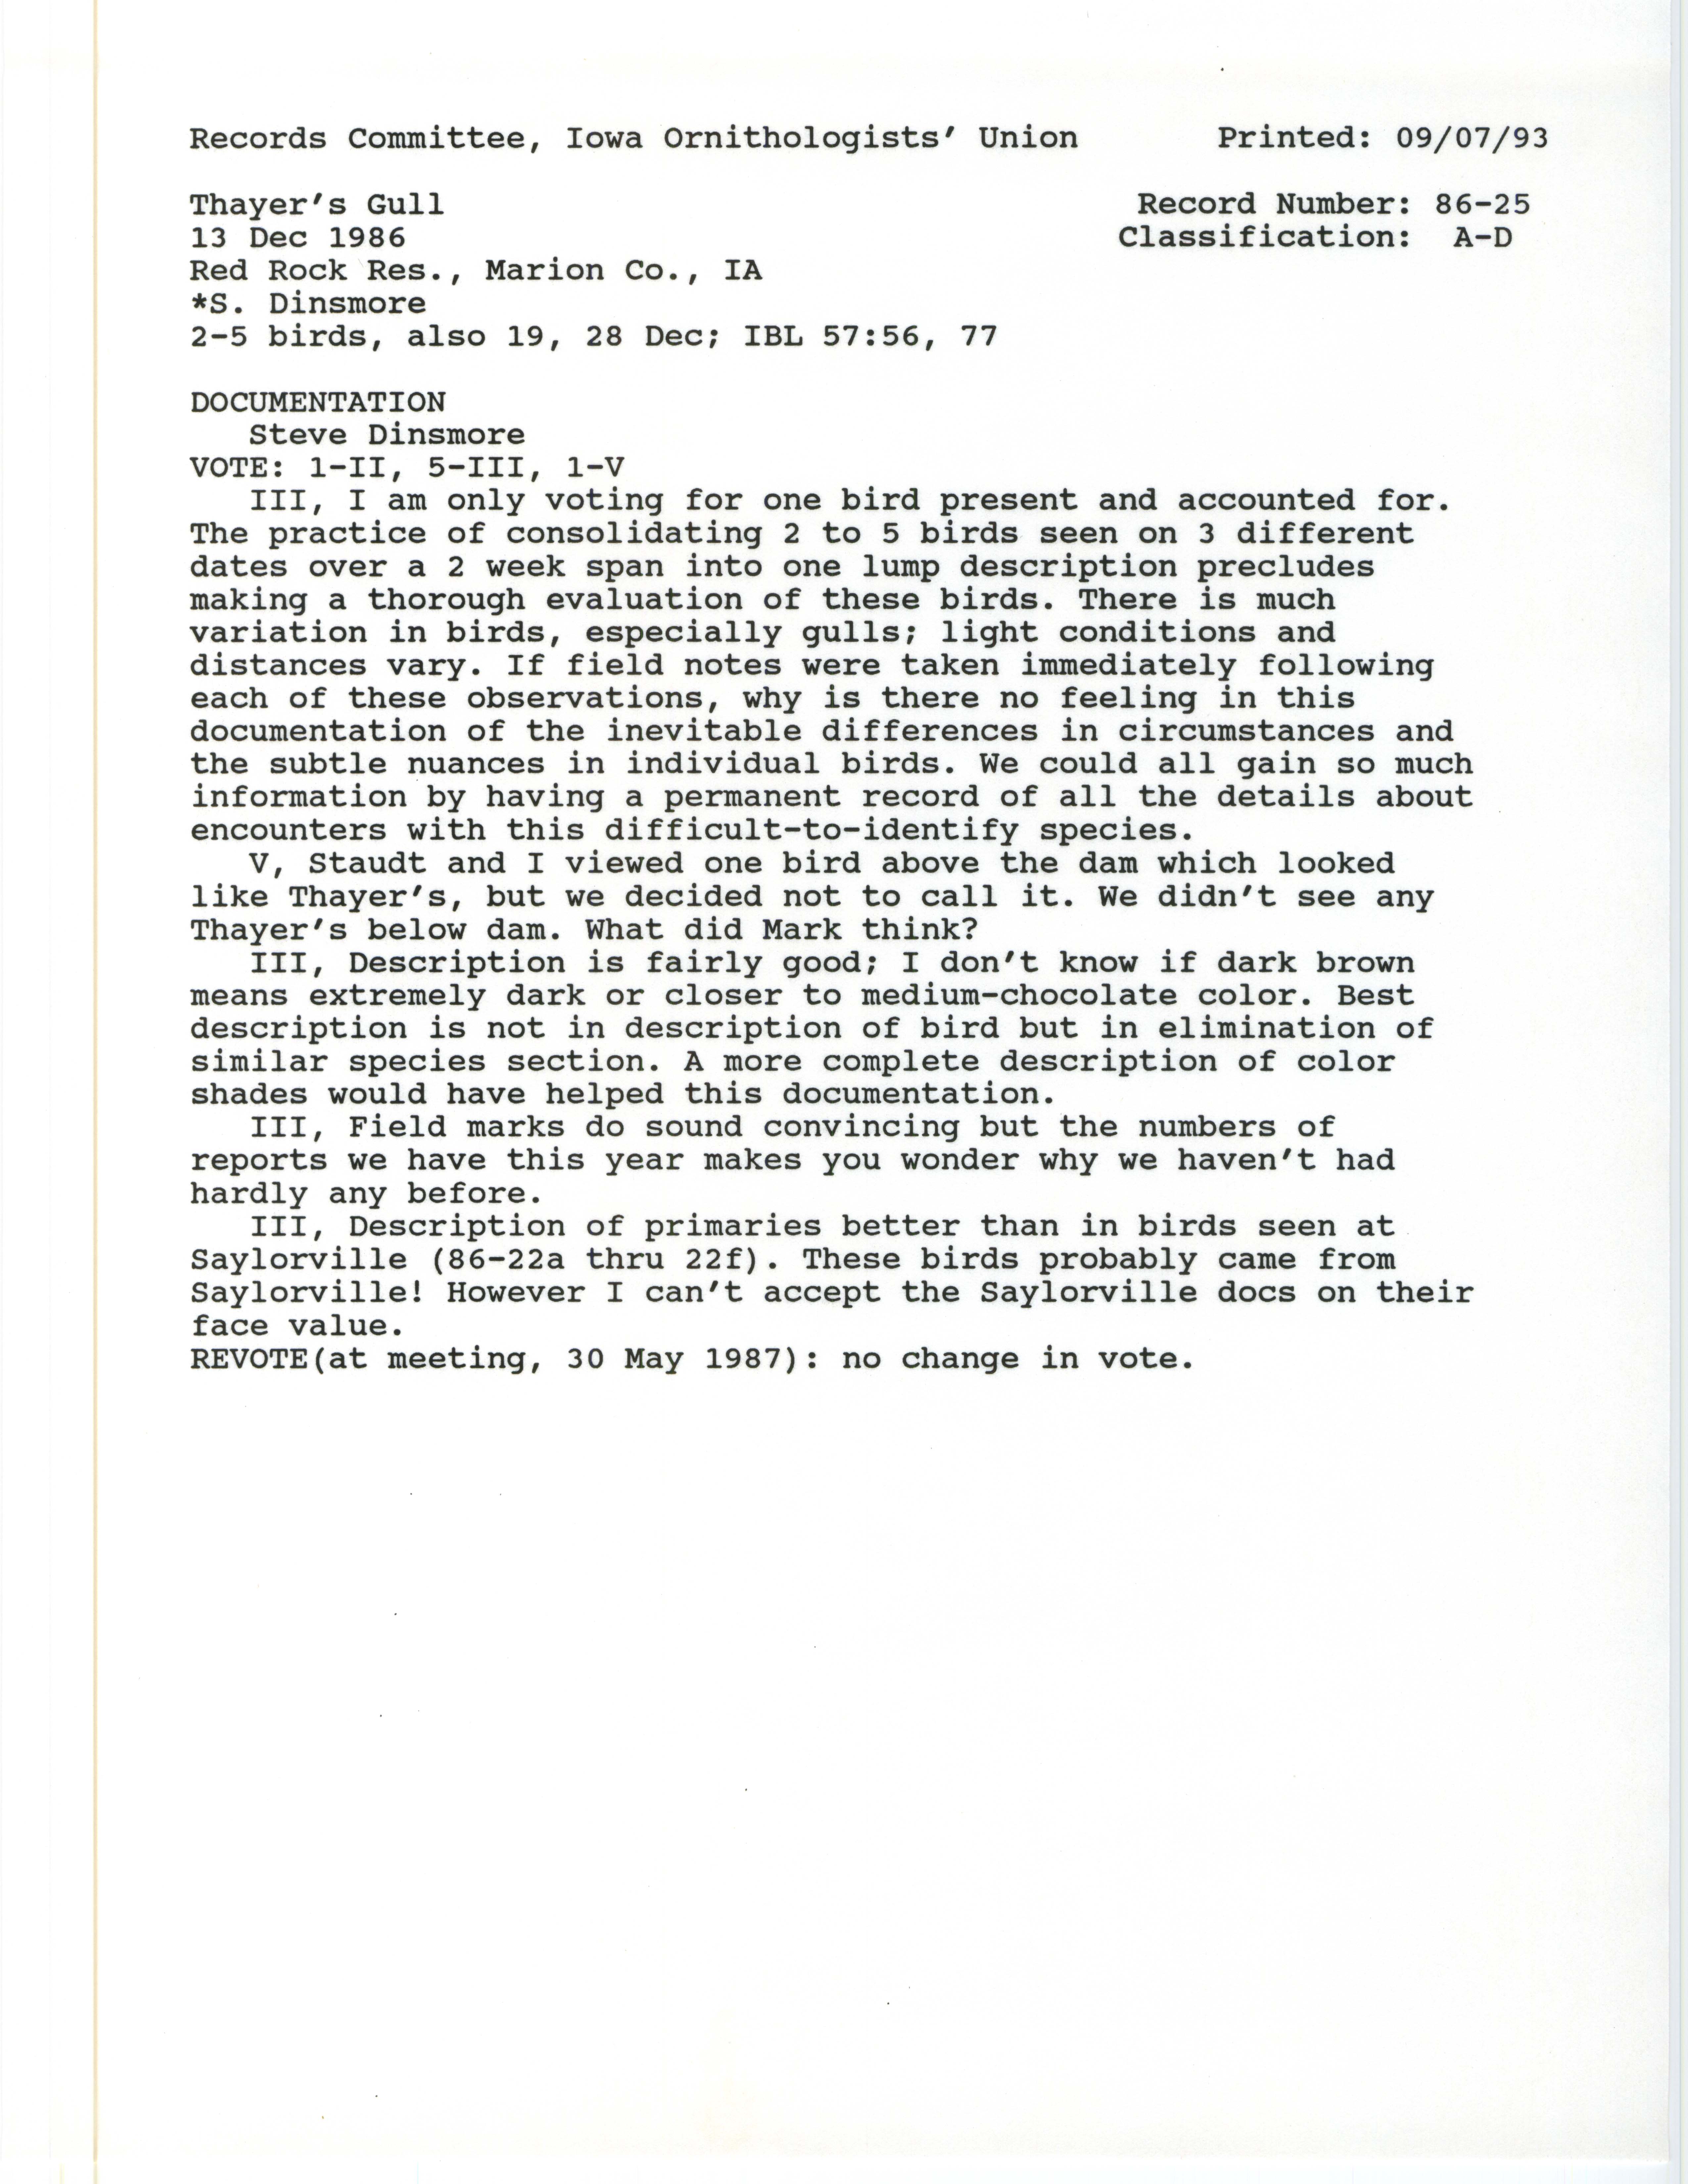 Records committee review for rare bird sighting of Thayer's Gull at Red Rock Reservoir, 1986